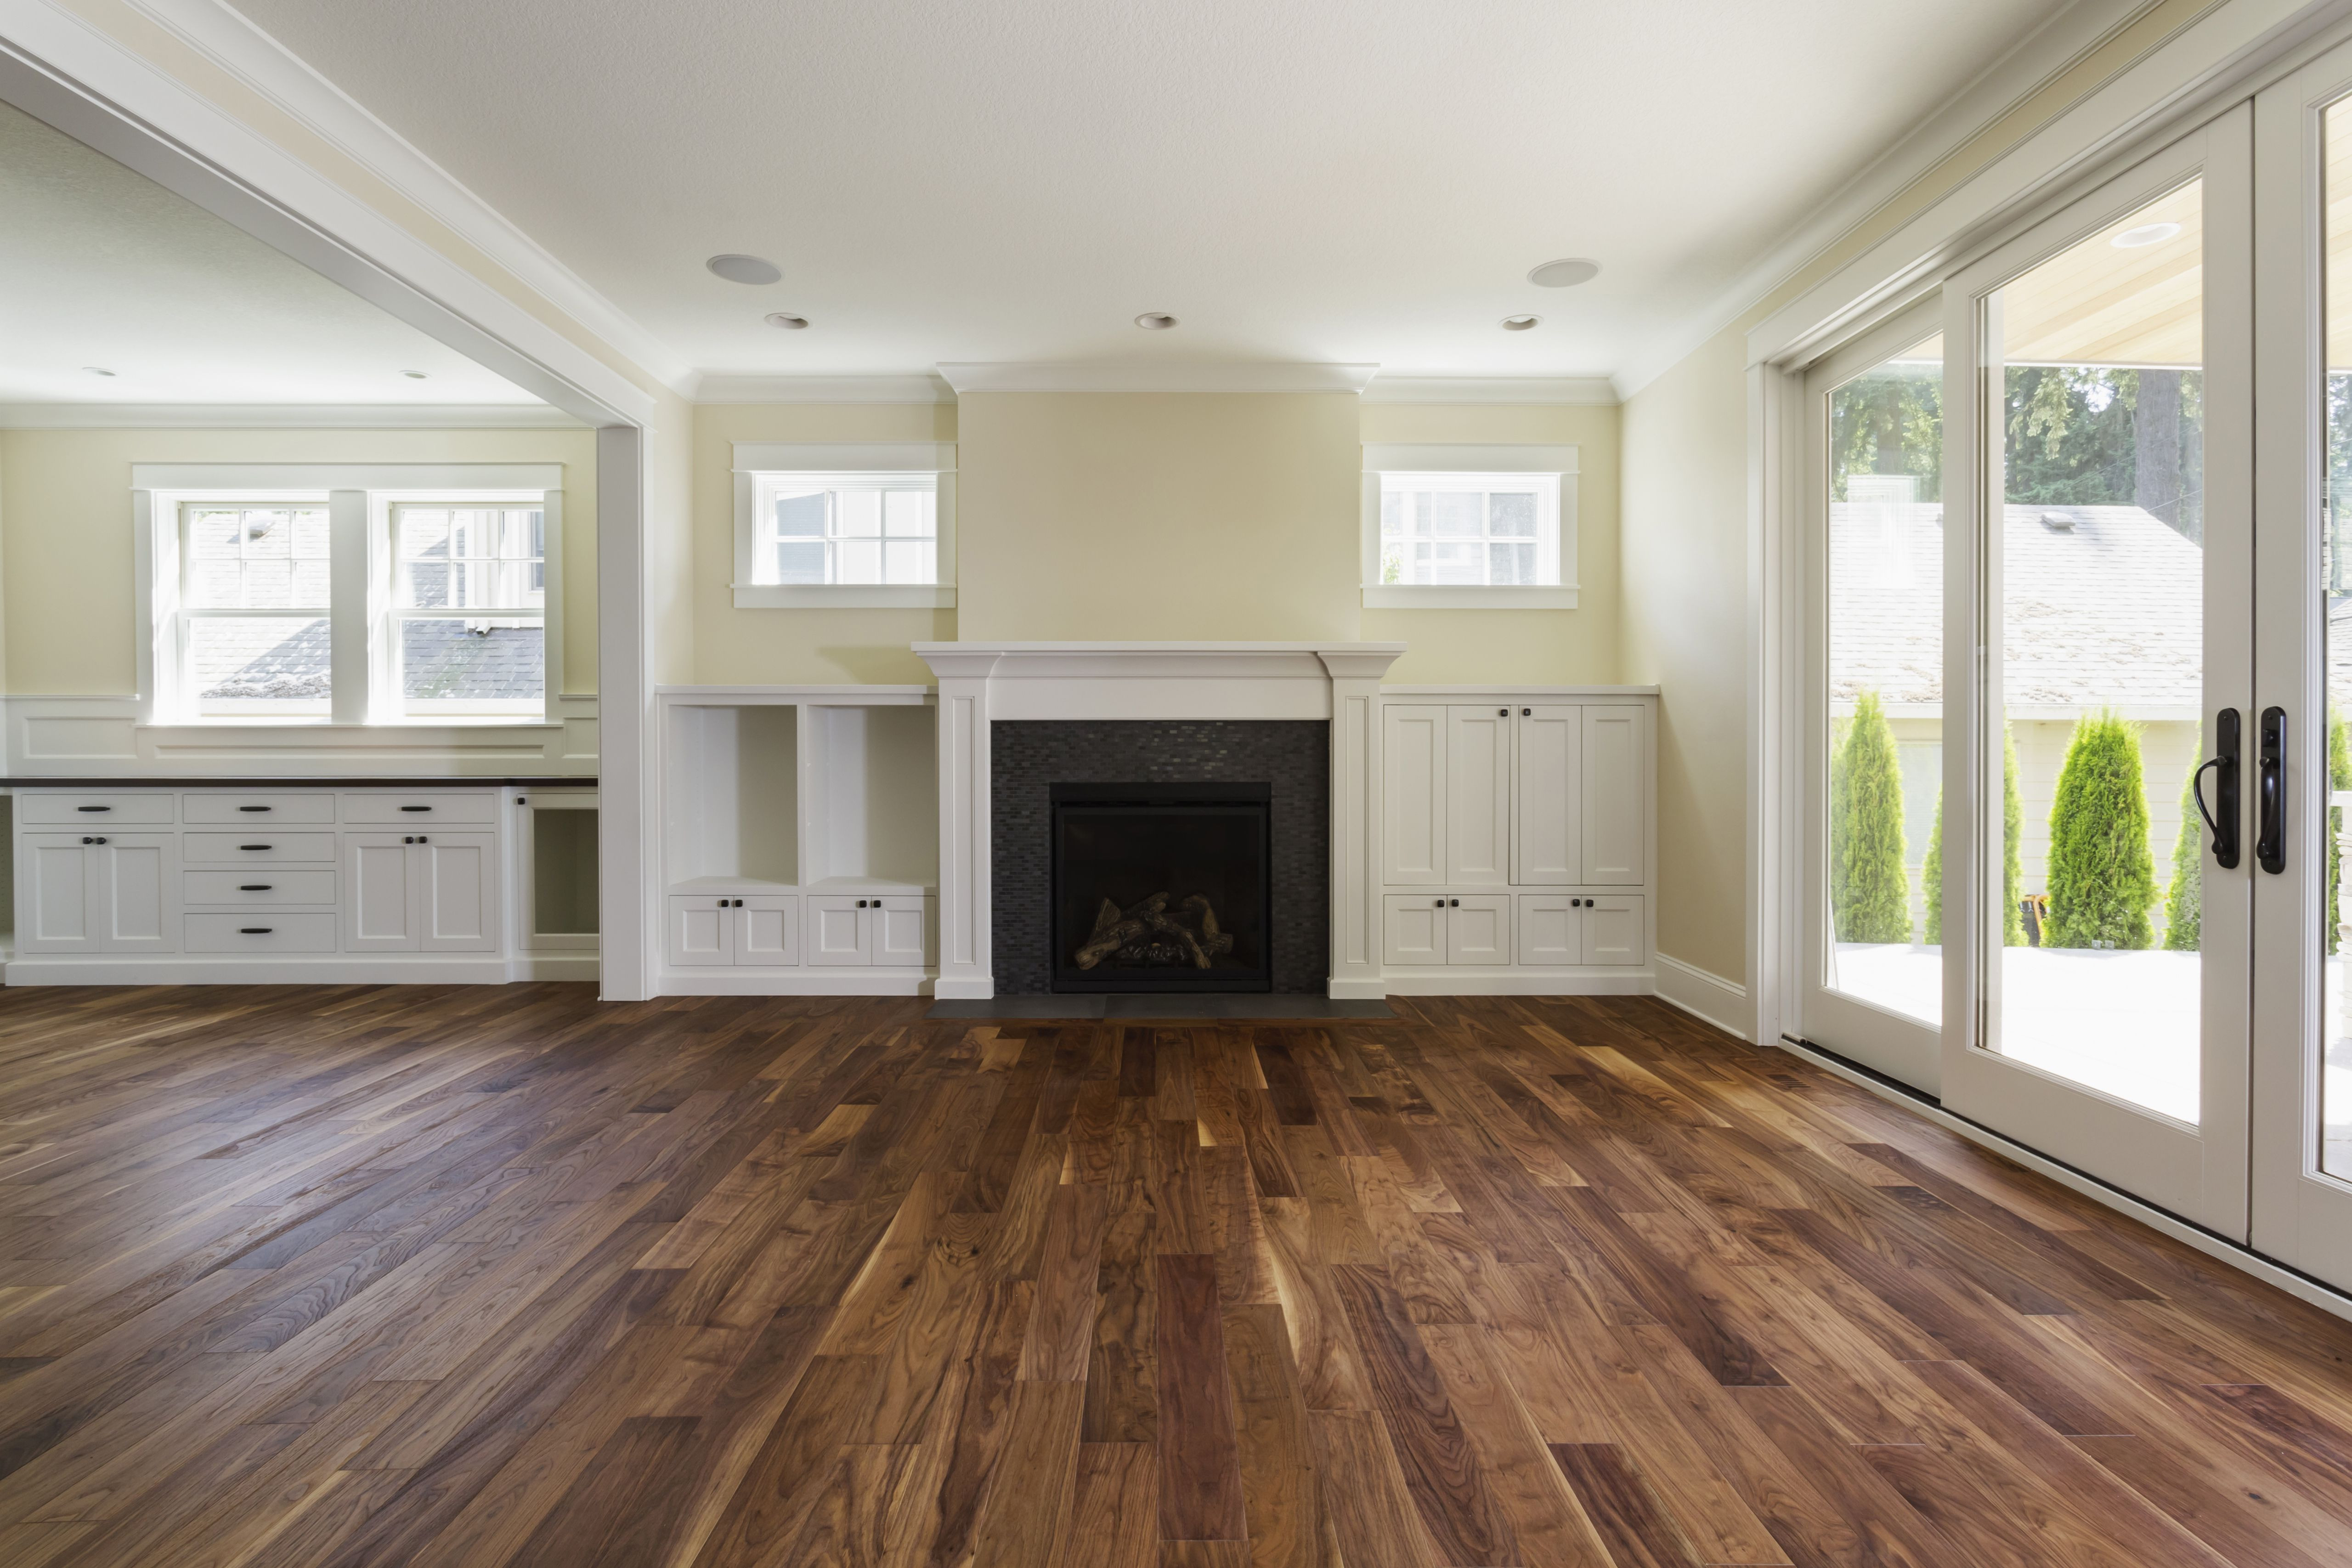 12 Stunning Raw Hardwood Flooring wholesale 2024 free download raw hardwood flooring wholesale of the pros and cons of prefinished hardwood flooring regarding fireplace and built in shelves in living room 482143011 57bef8e33df78cc16e035397